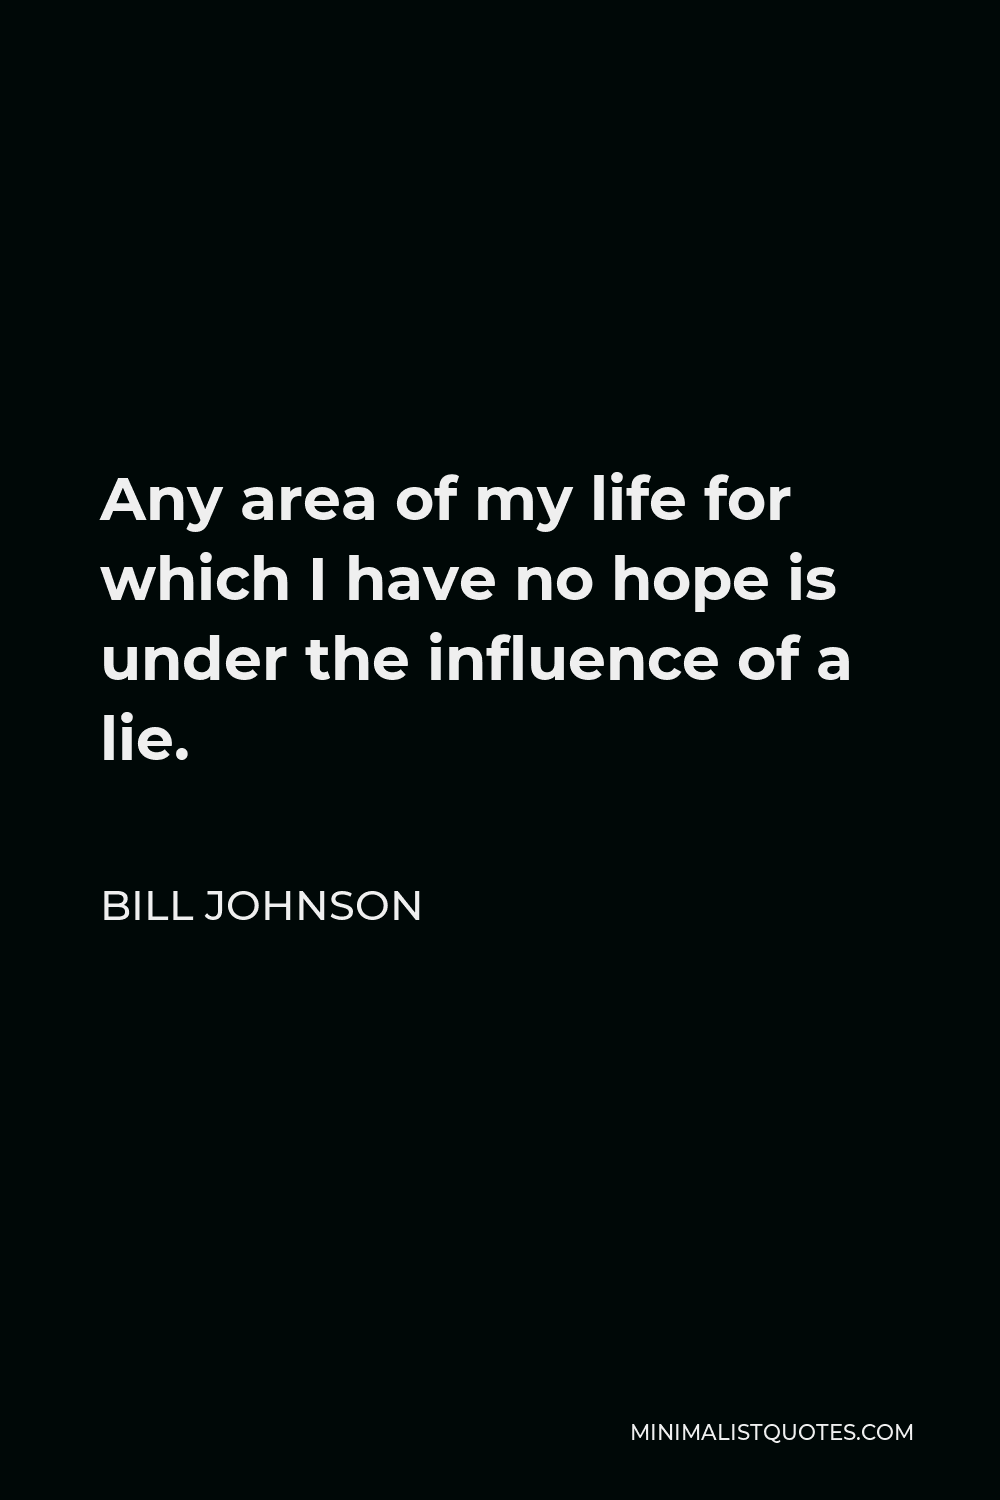 Bill Johnson Quote - Any area of my life for which I have no hope is under the influence of a lie.